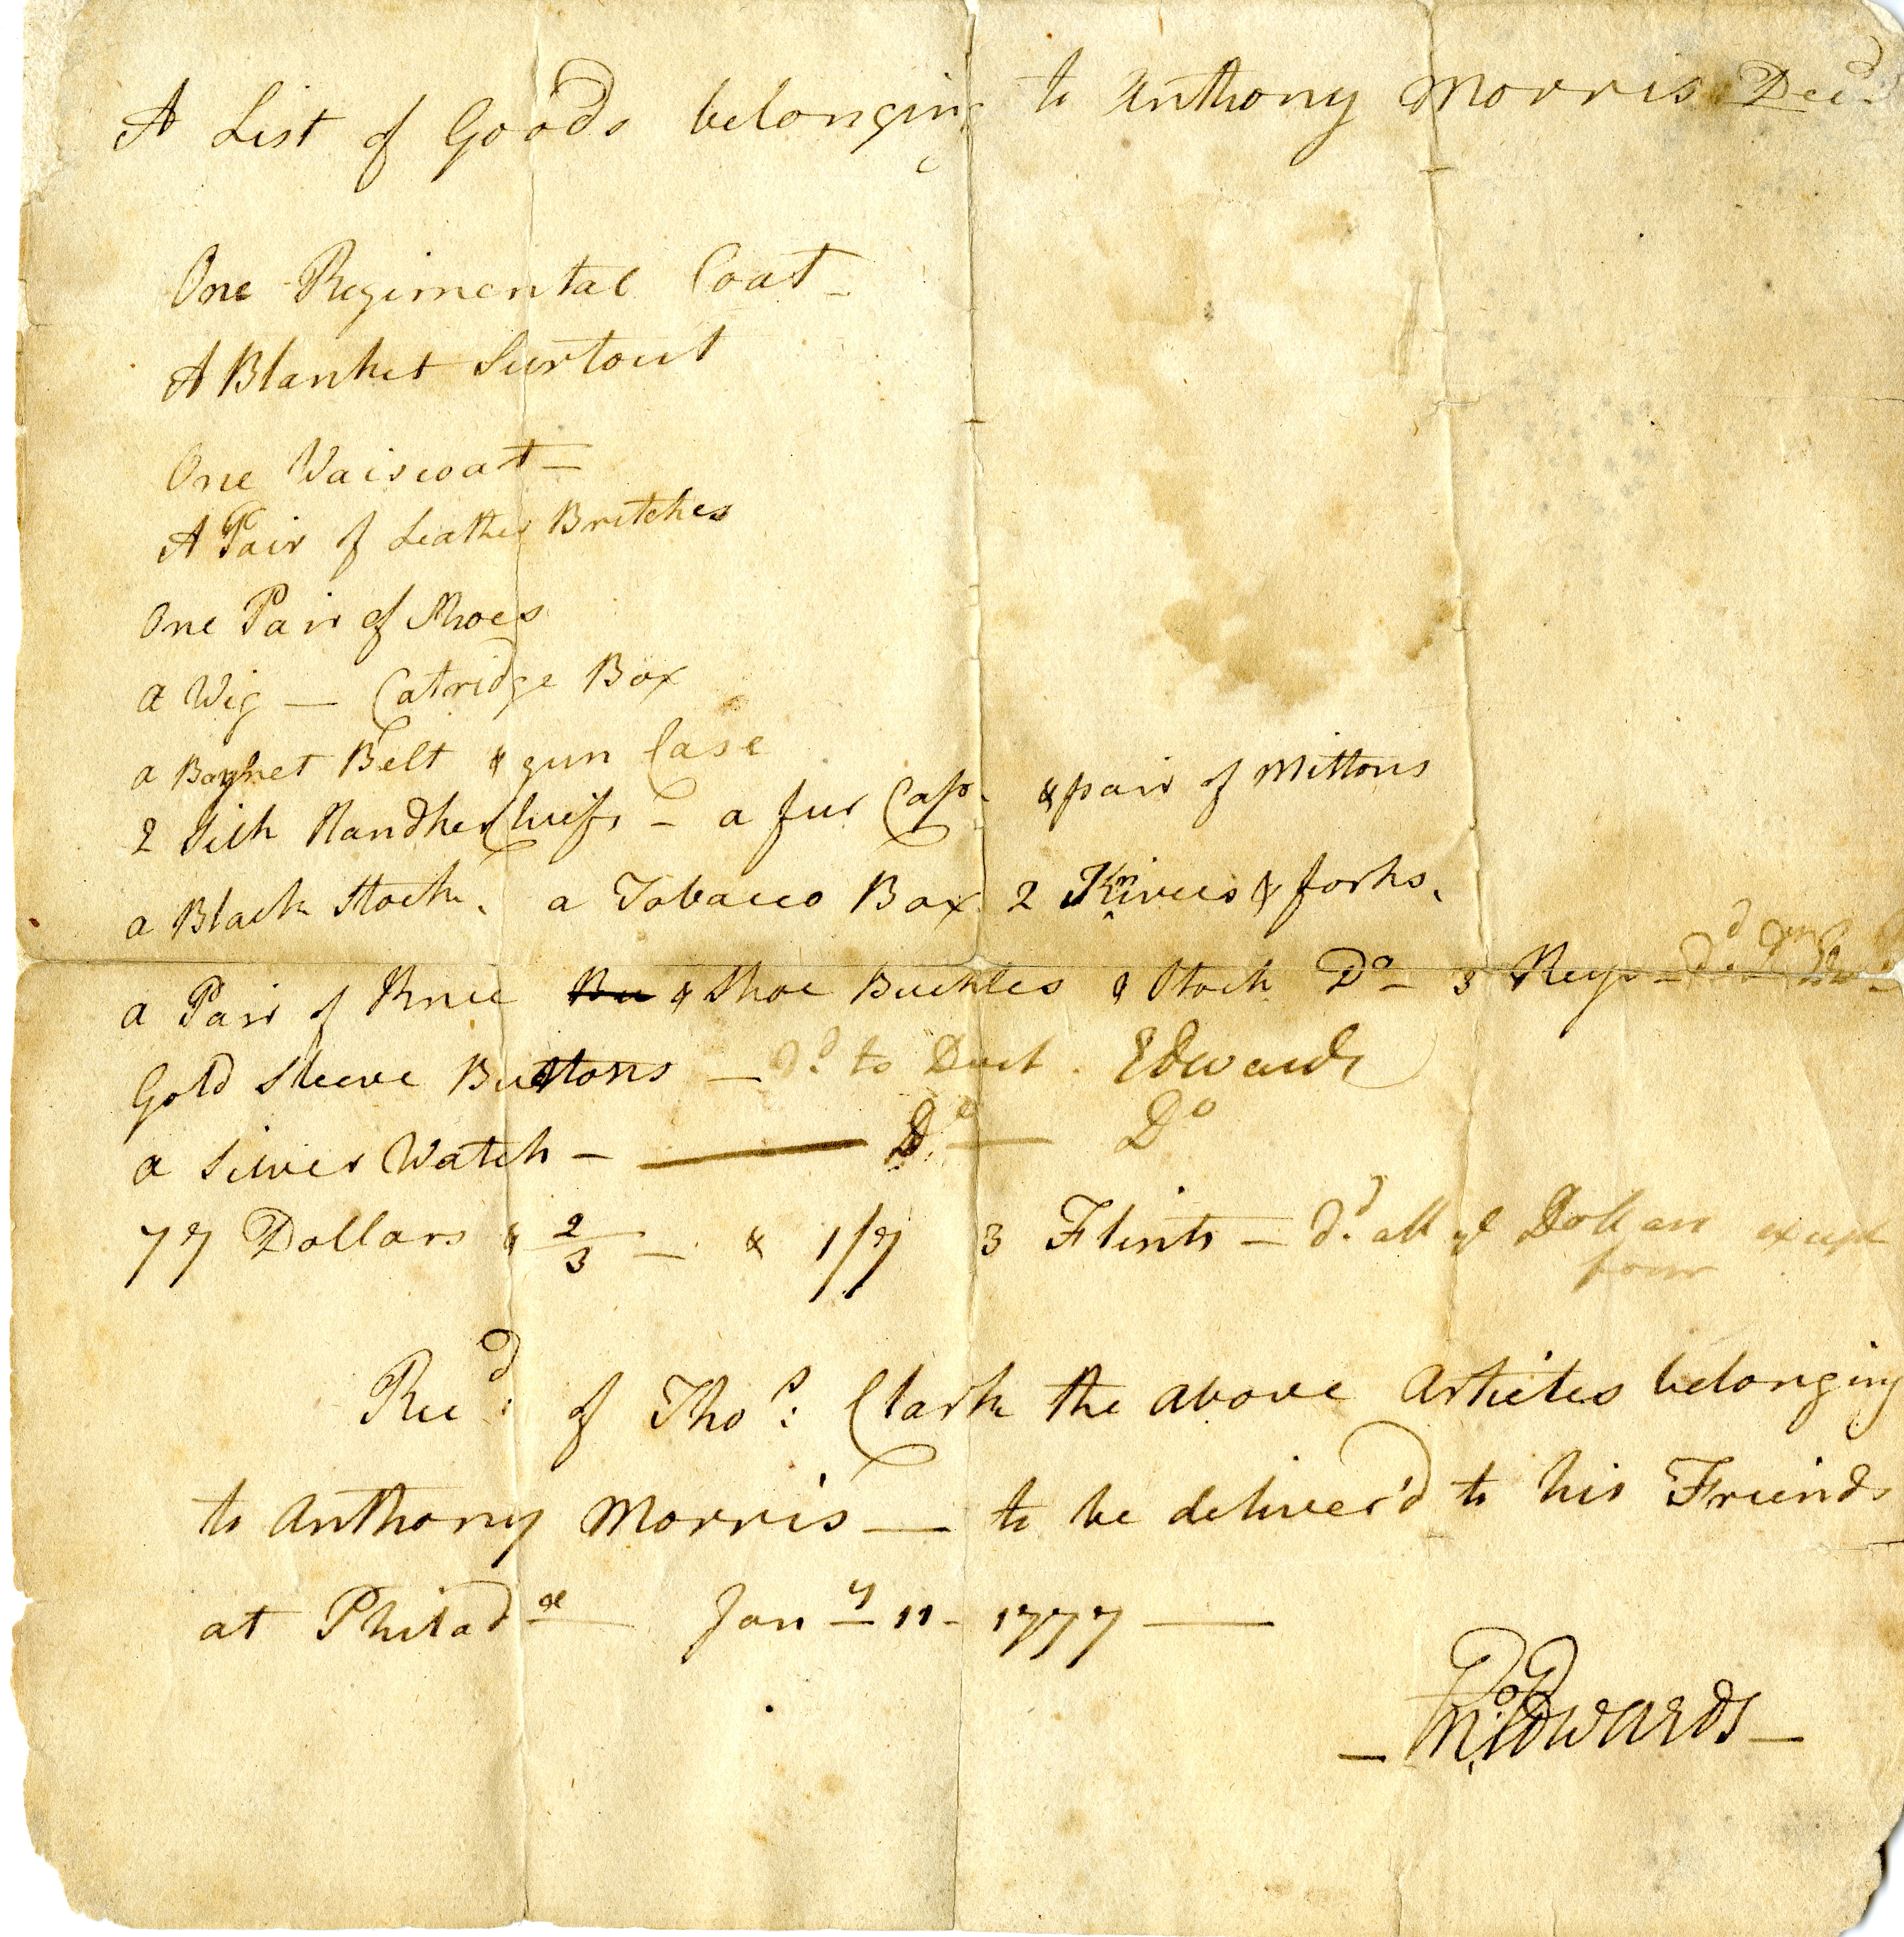 “A List of Goods belonging to Anthony Morris Dec’d,” Enoch Edwards, January 11, 1777